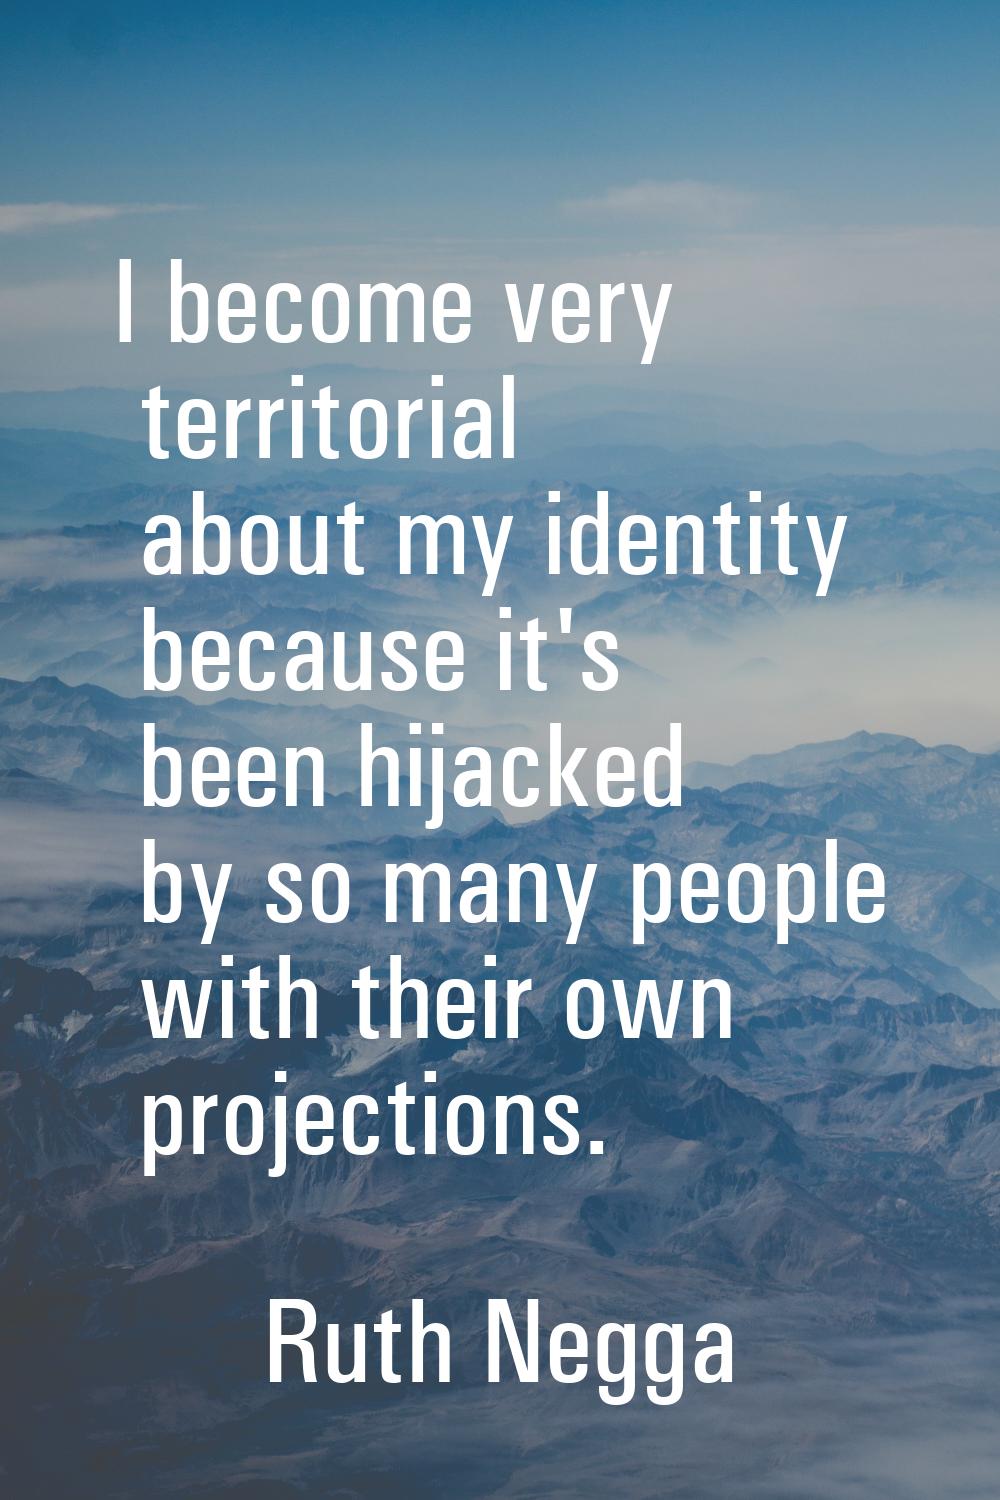 I become very territorial about my identity because it's been hijacked by so many people with their